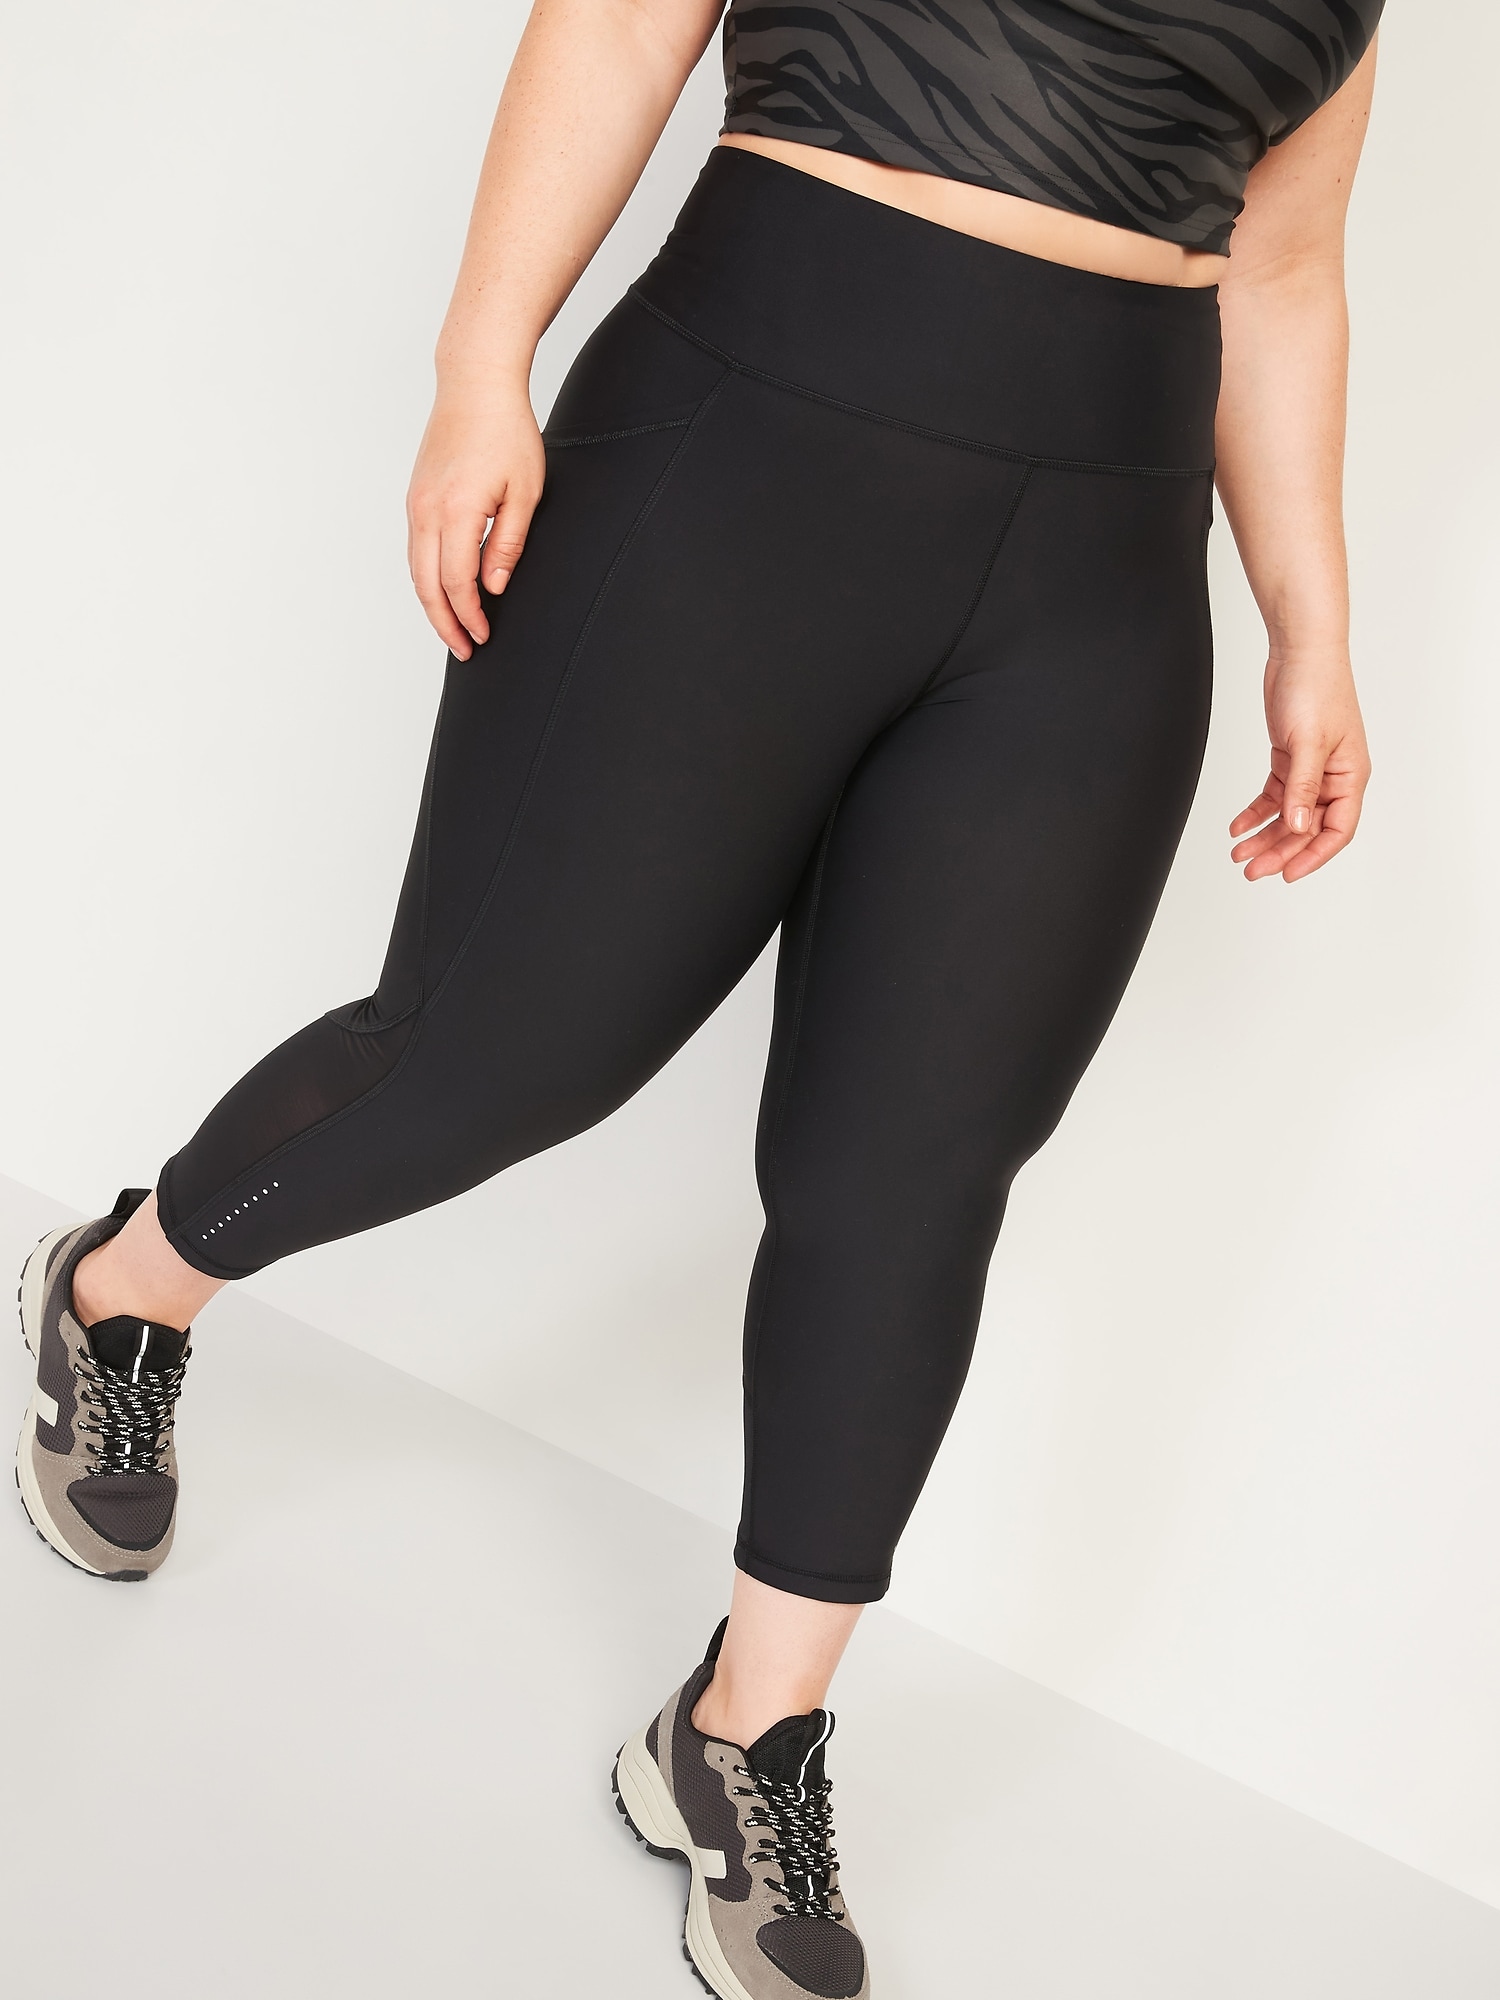 Today Only! Old Navy Active Pants or Elevate Leggings just $12